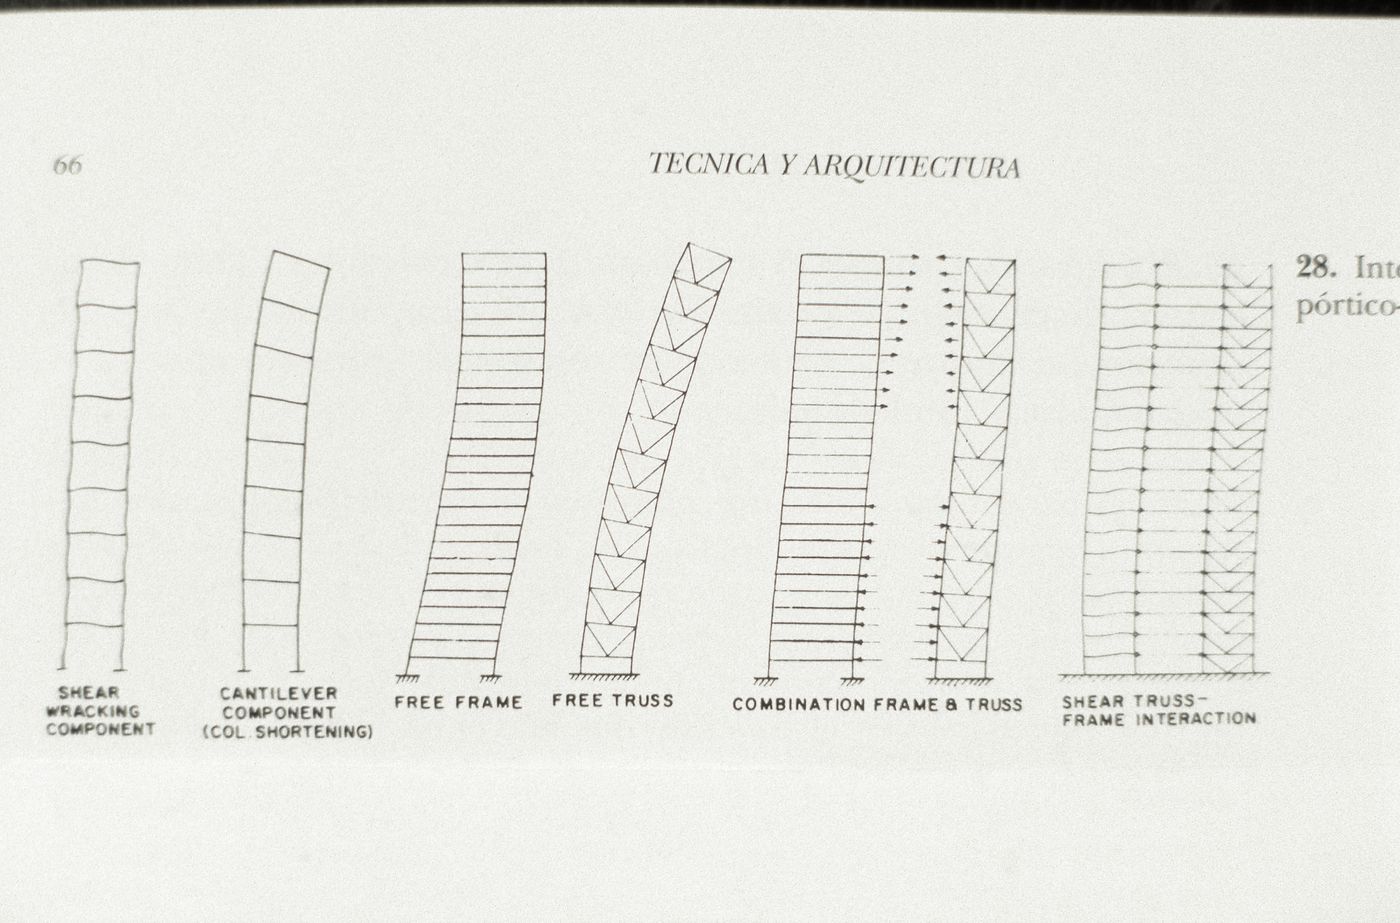 Slide with a diagram showing truss and frame interactions, an image from the publication "Técnica y Arquitectura”